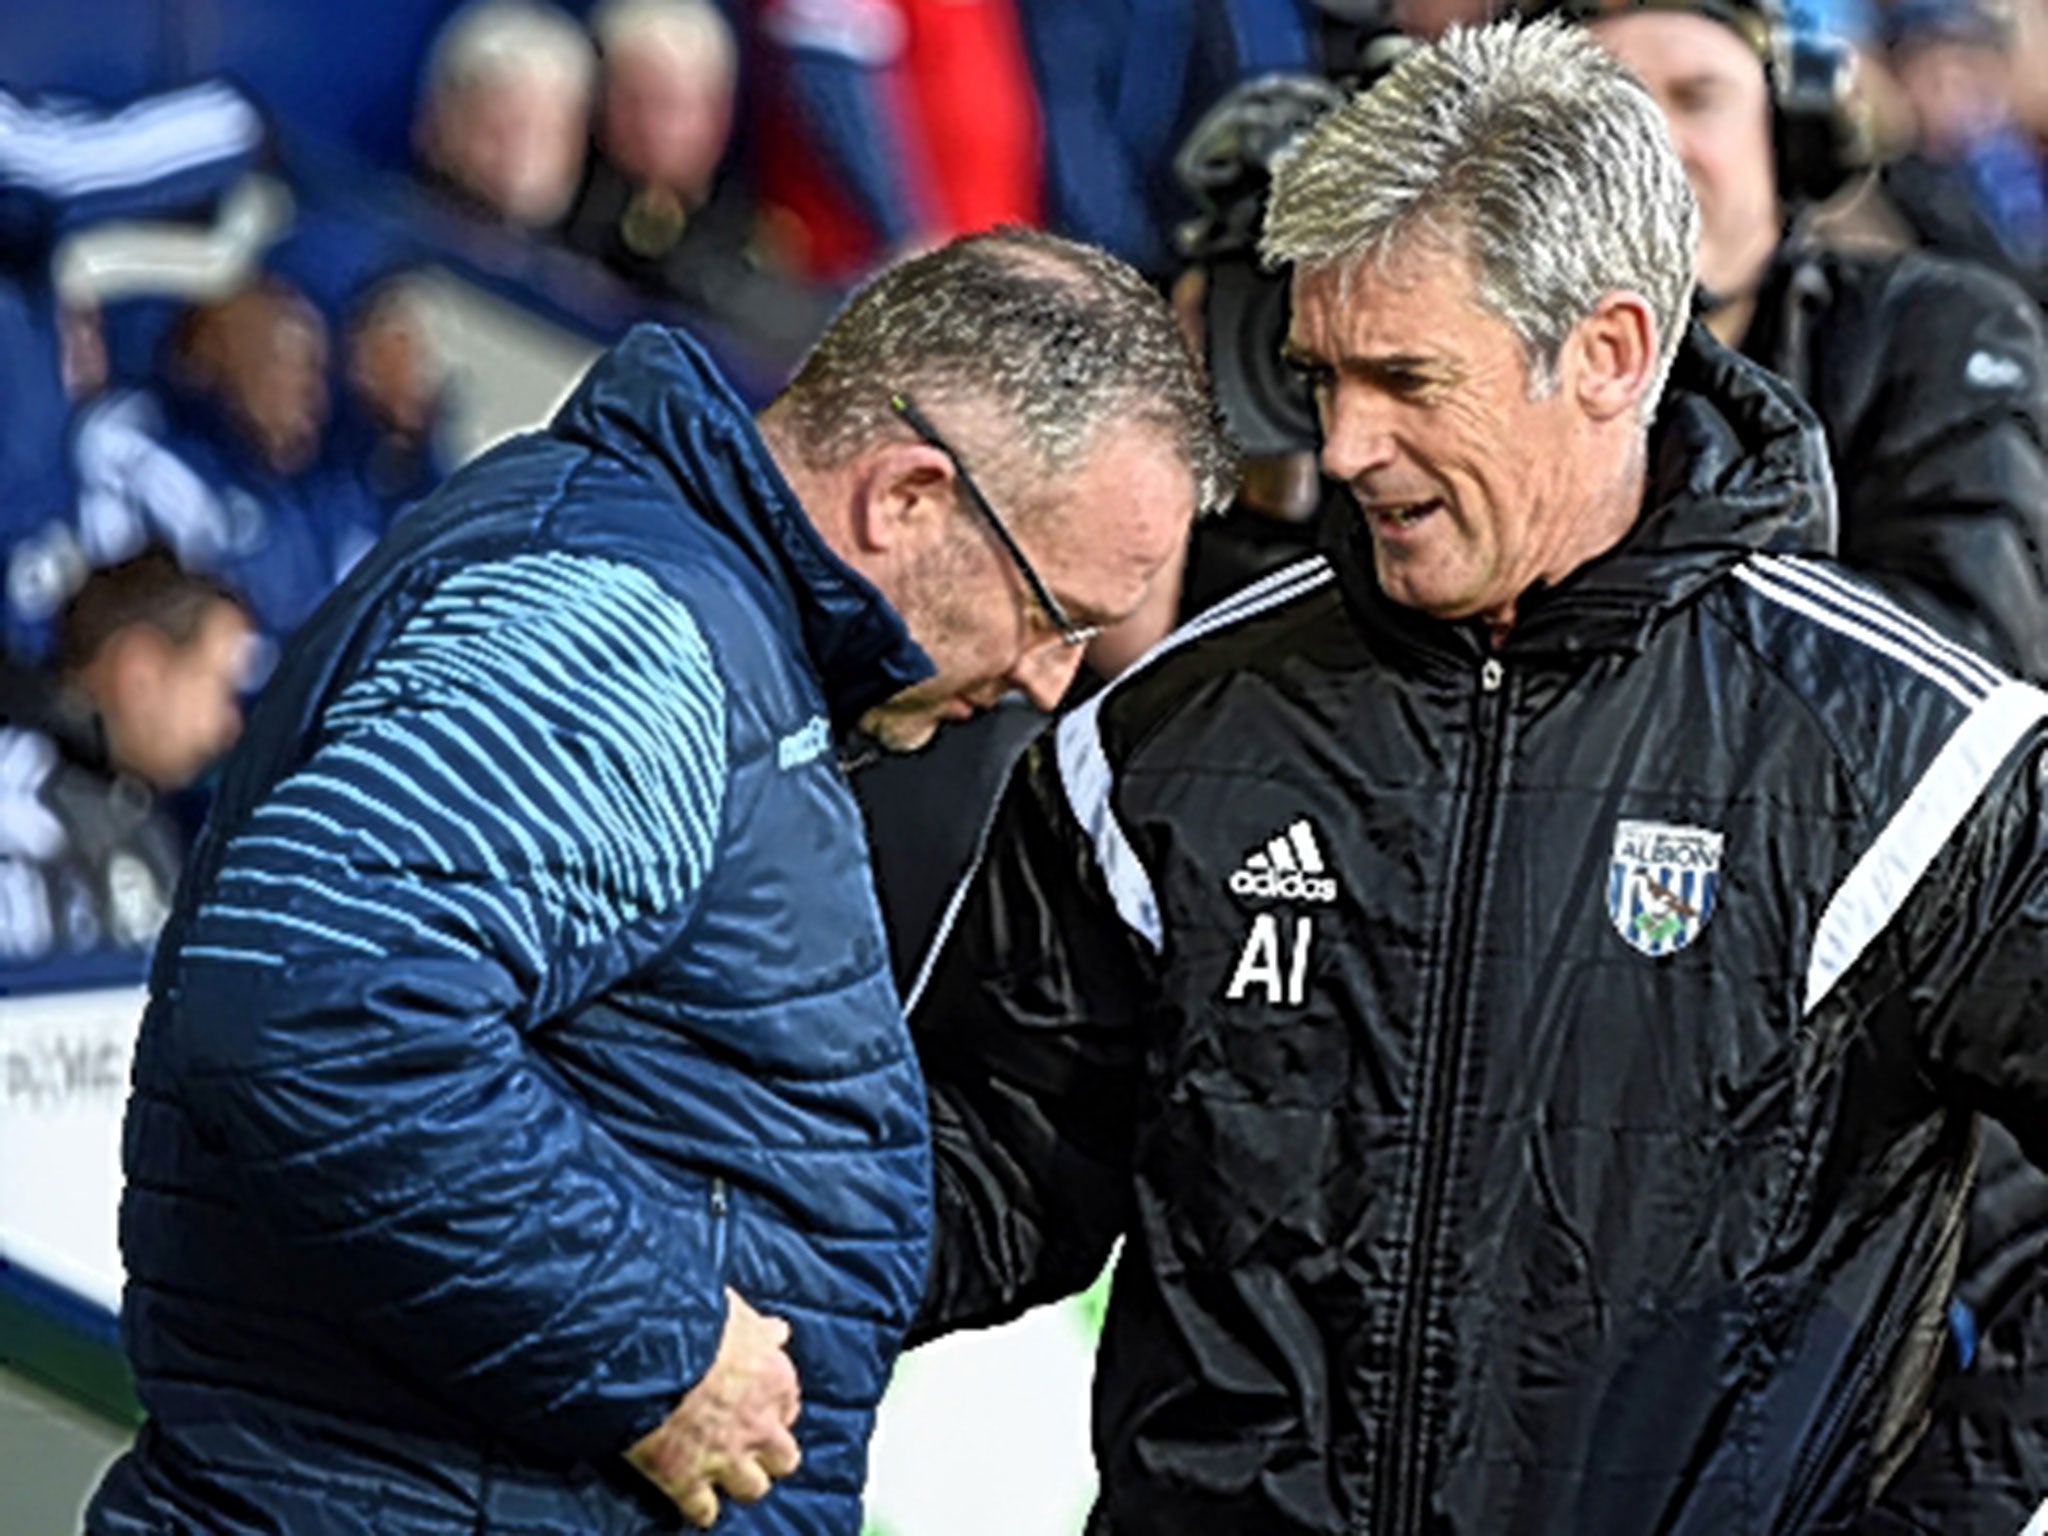 Paul Lambert and Alan Irvine converse ahead of the game at The Hawthorns